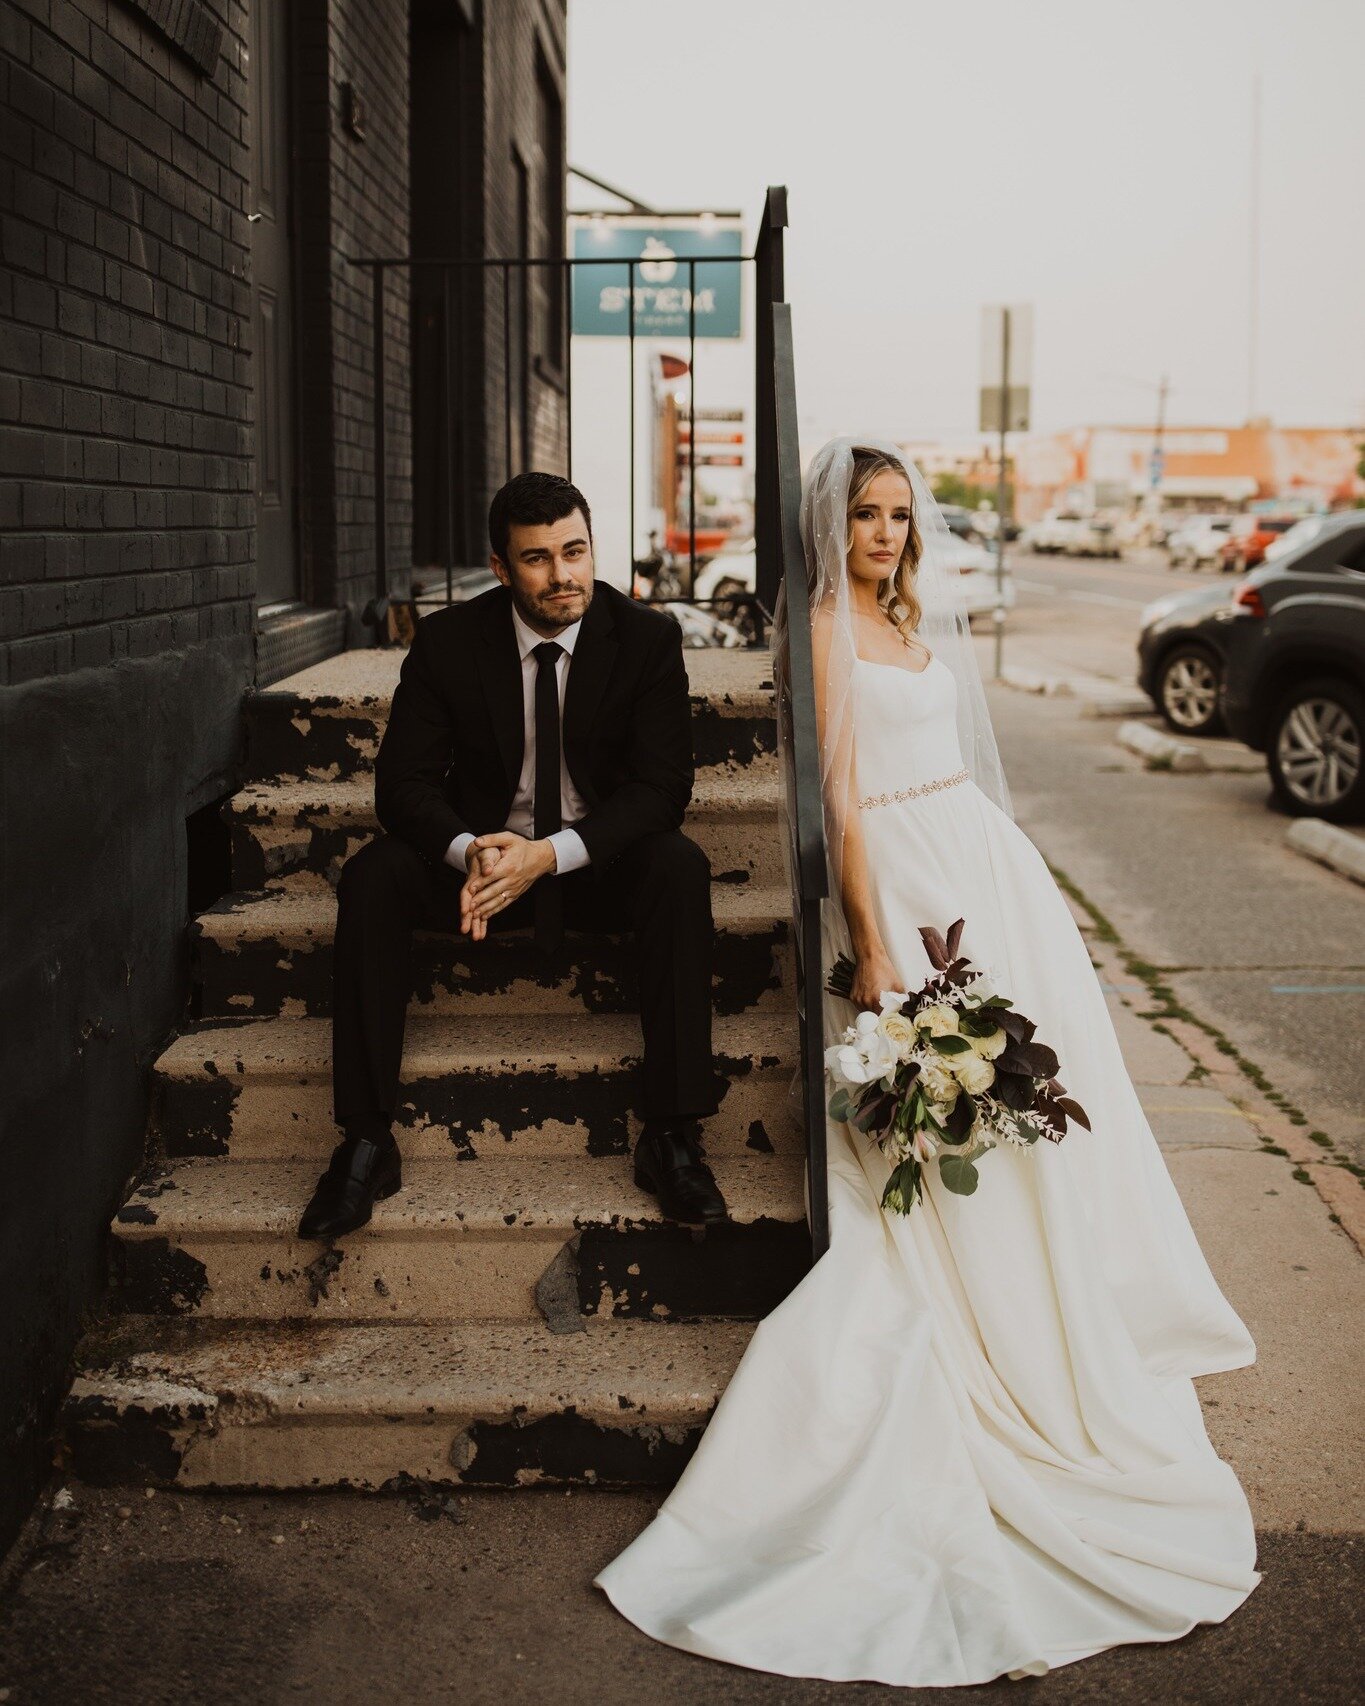 Denver Downtown.

We don't just have mountains over here! (but the mountains are beautiful too). 

Photographer: @ashleecrowdenphoto 
Planner: @abridesbestmate
HMU: @torimuah 
Dress and Veil: @vowdweddings 
Bride: @jennacarara 
Groom: @samislending 
